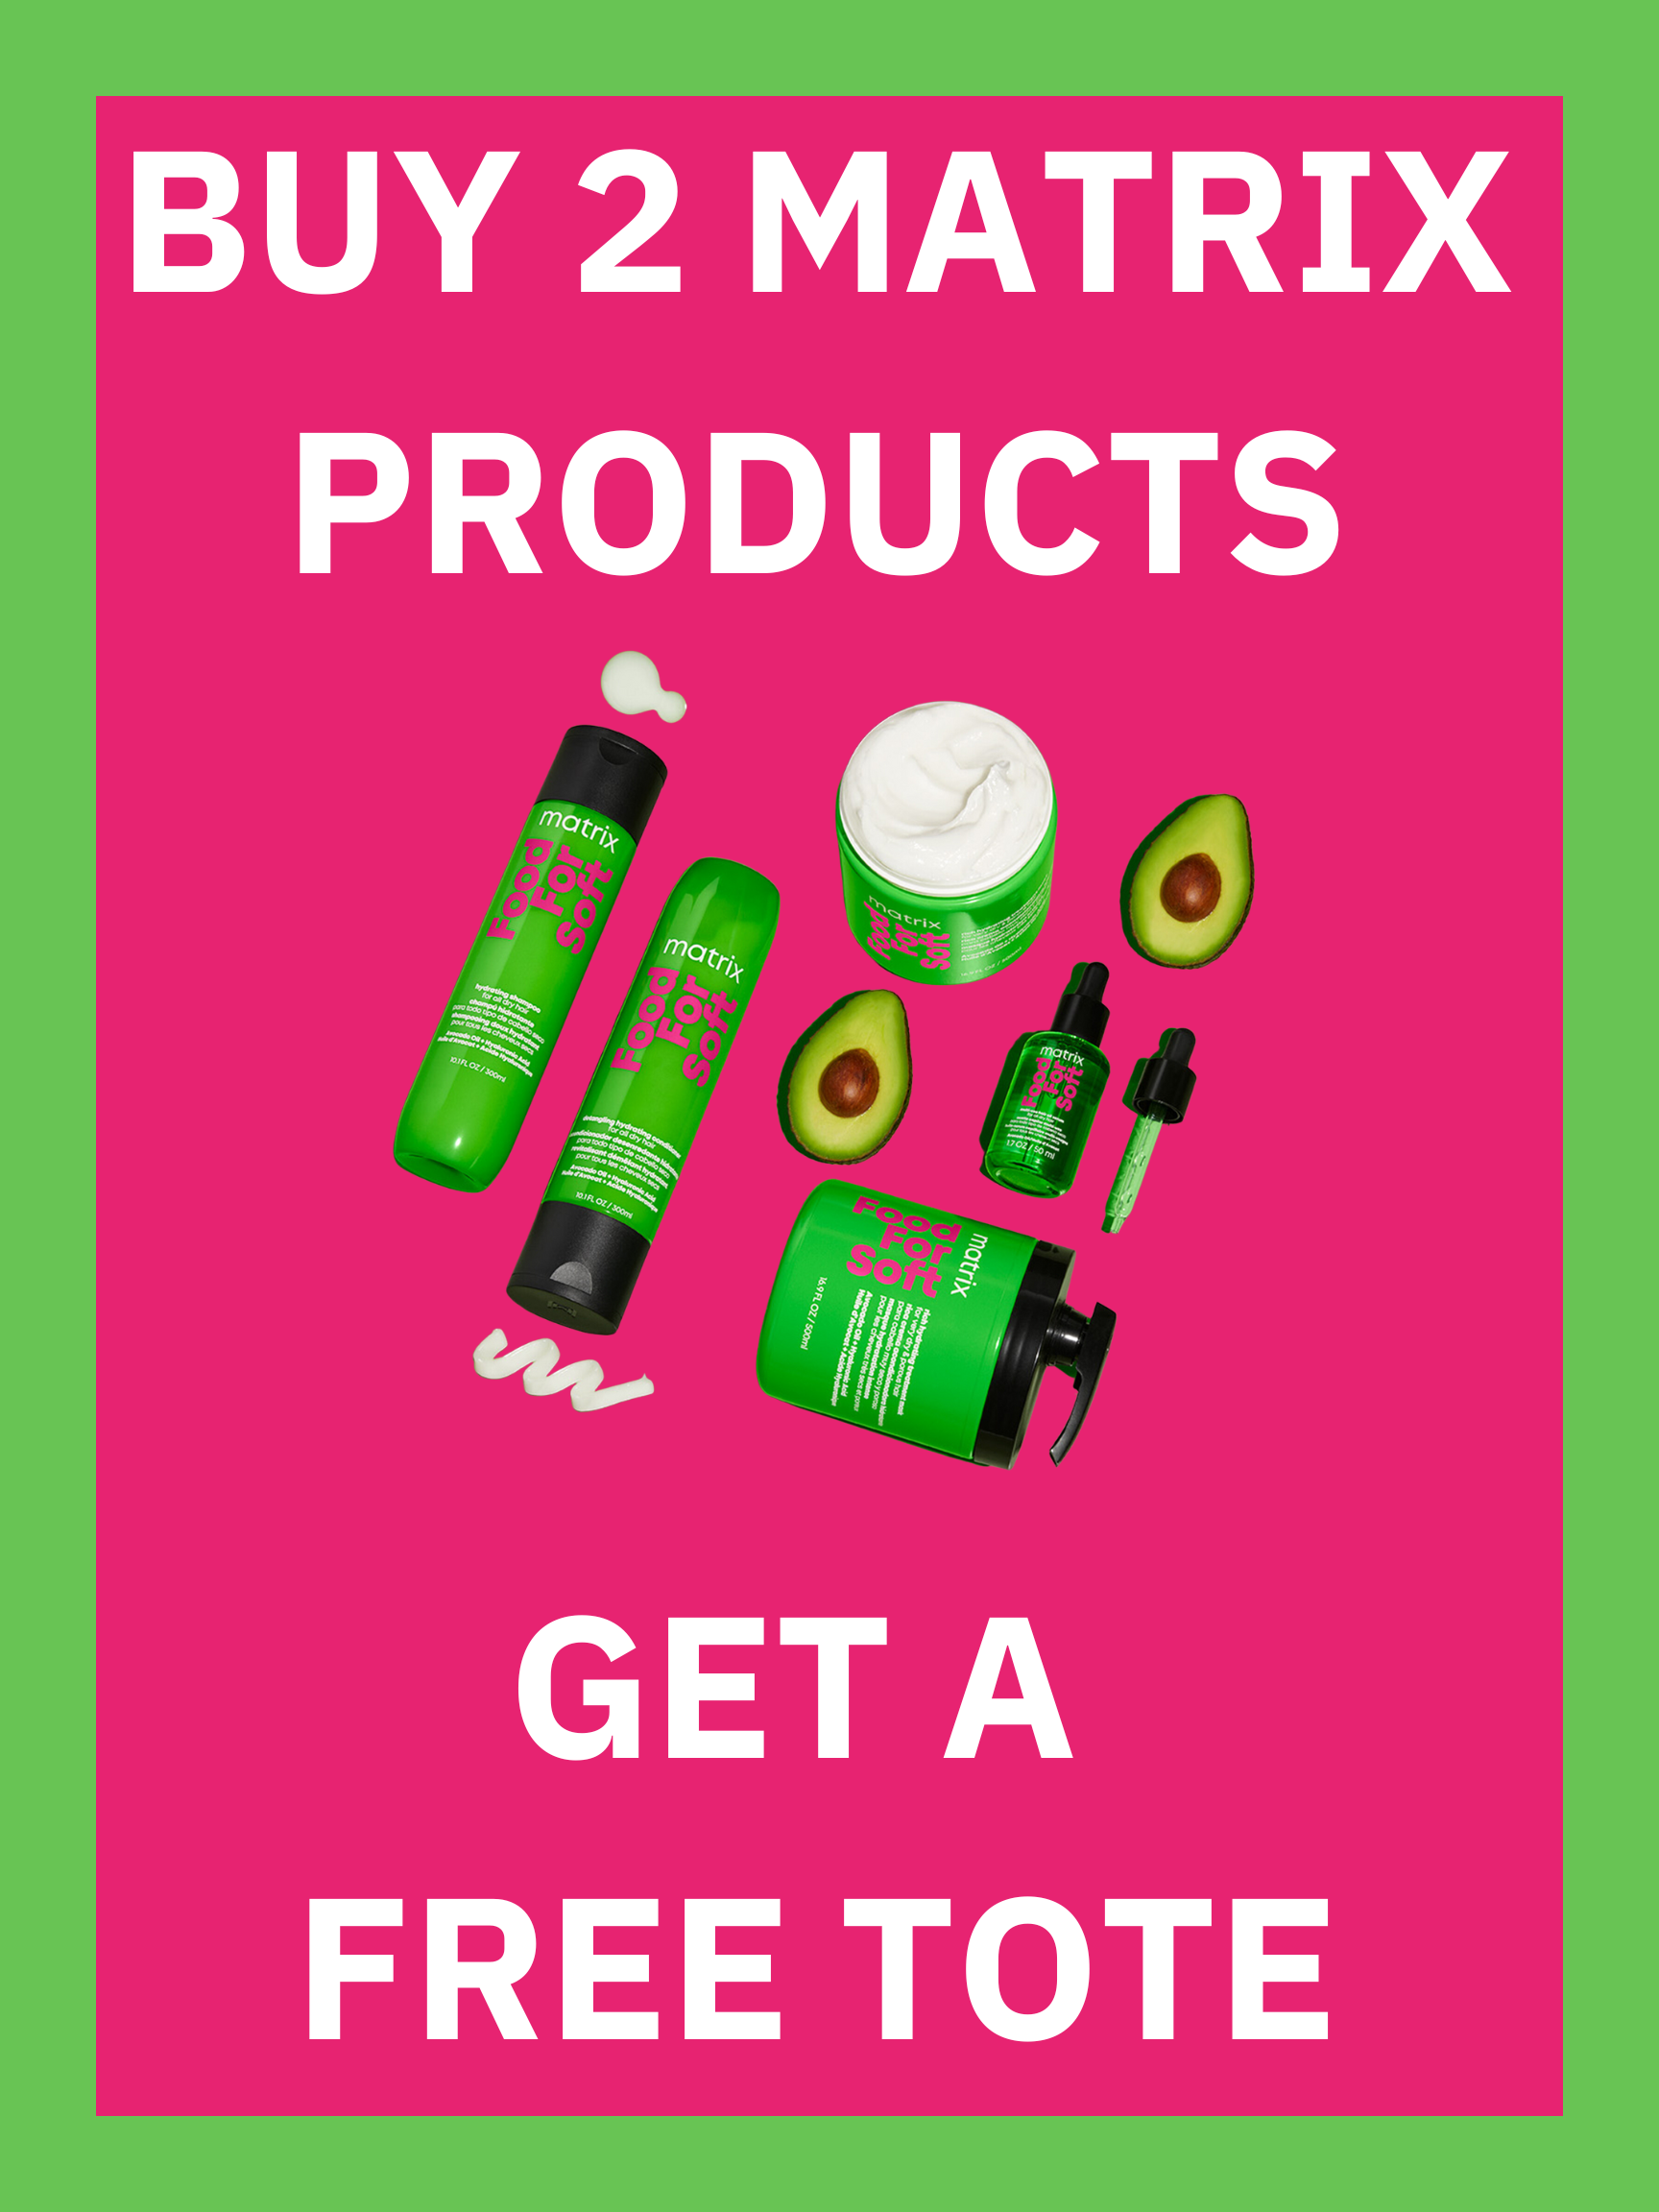 BUY 2 MATRIX PRODUCTS GET A FREE TOTE for packet